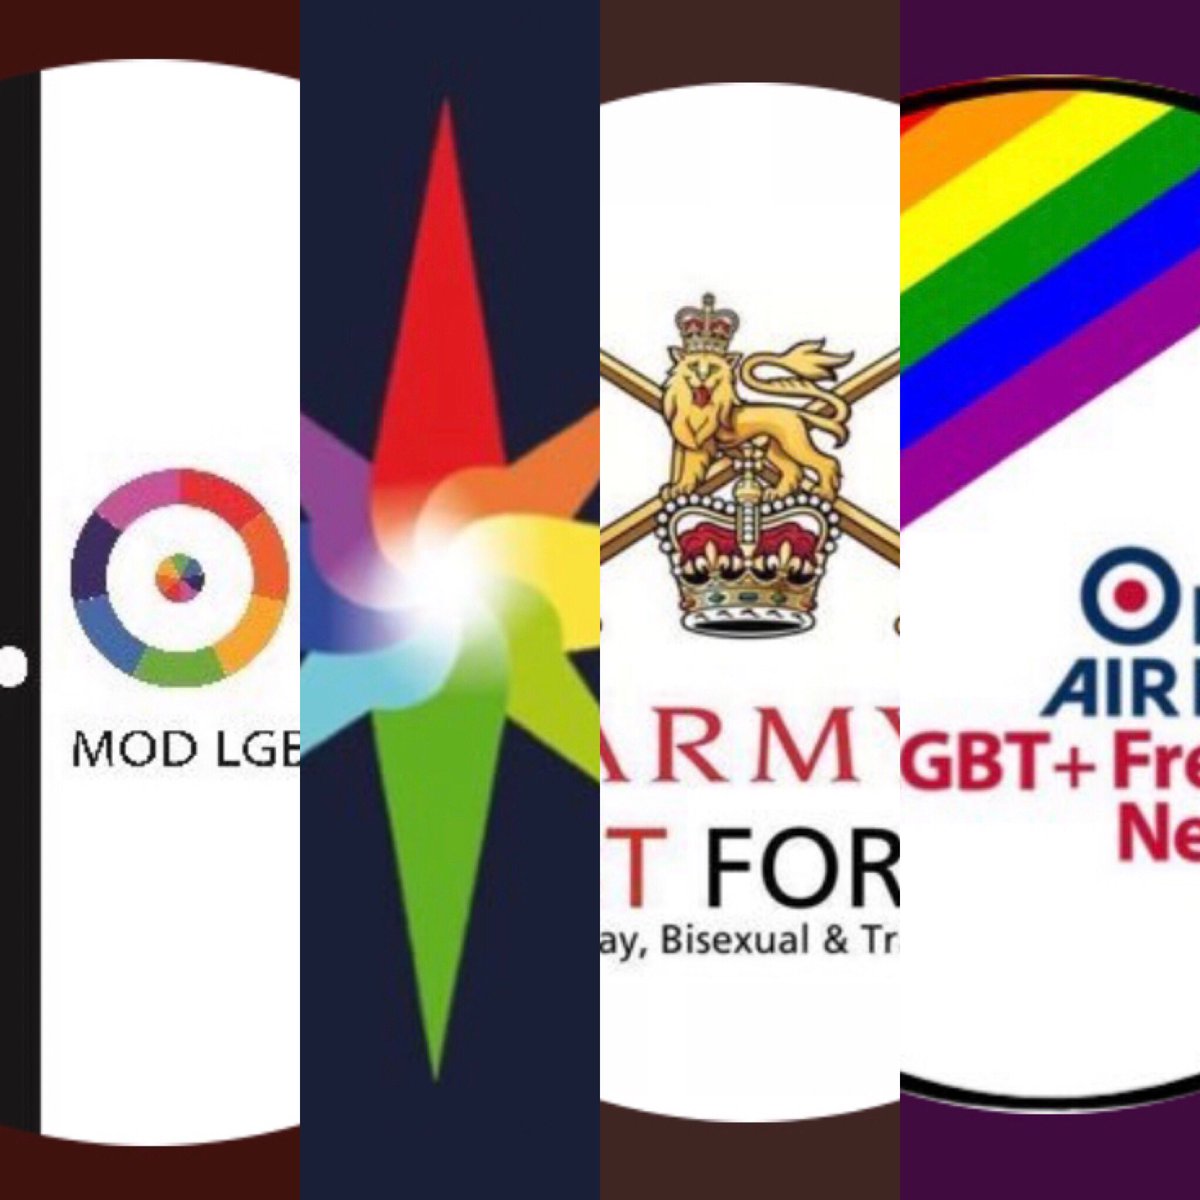 We’ve changed our profile photograph for February to represent #WholeForce #QuadService visibility for #LGBTHistoryMonth ... what do you think? @LGBTHM #LGBTHM19 
@MODLGBT @RNCompass @ArmyLGBT @RAF_LGBT